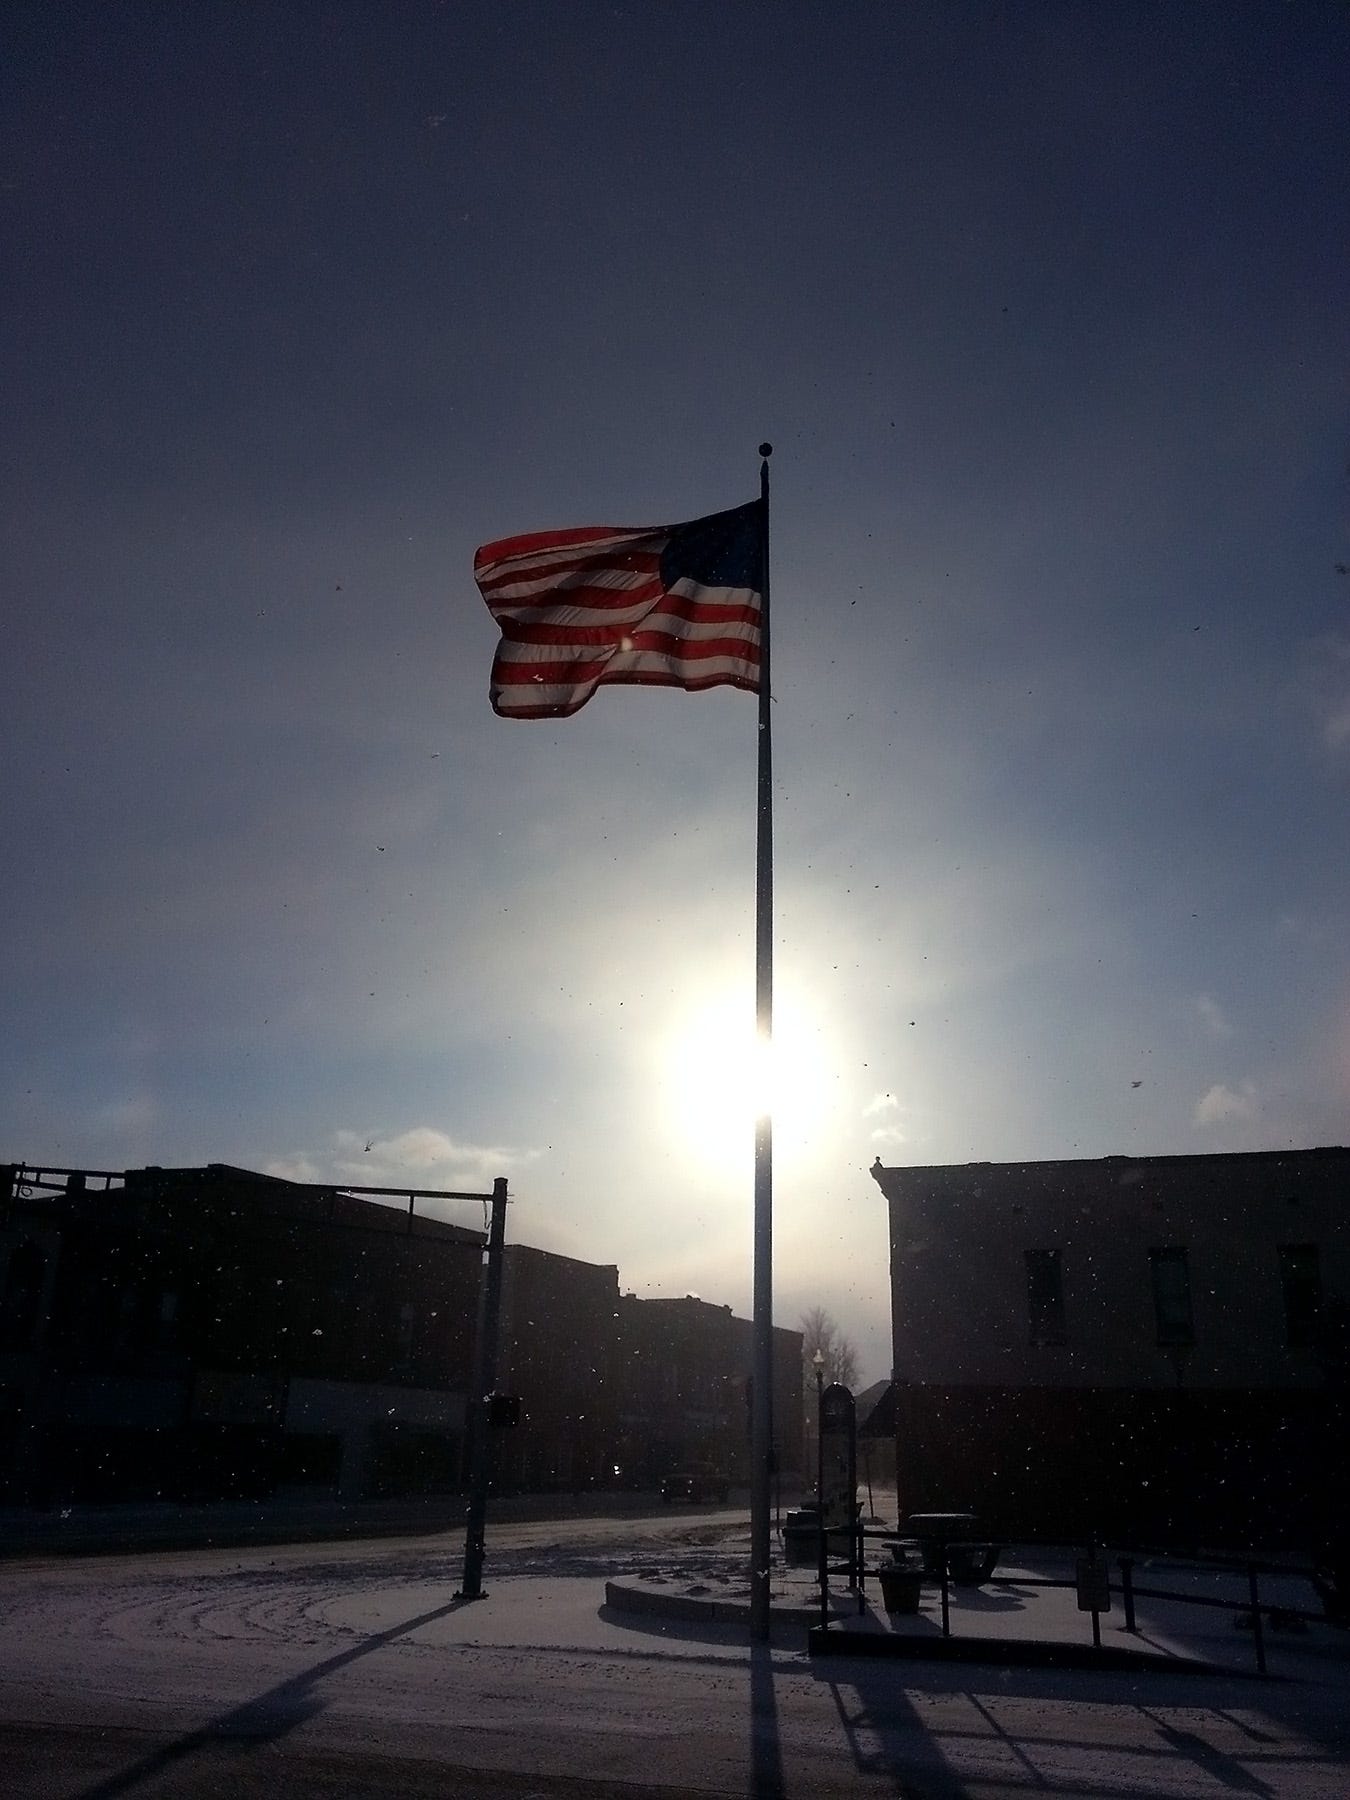 The deep cold of winter creates crisp, clear conditions on Knightstown’s Public Square, located just of U.S. 40. A late afternoon sun illuminates snow flurries and Old Glory, whipping angrily in a brisk, southwesterly wind. 